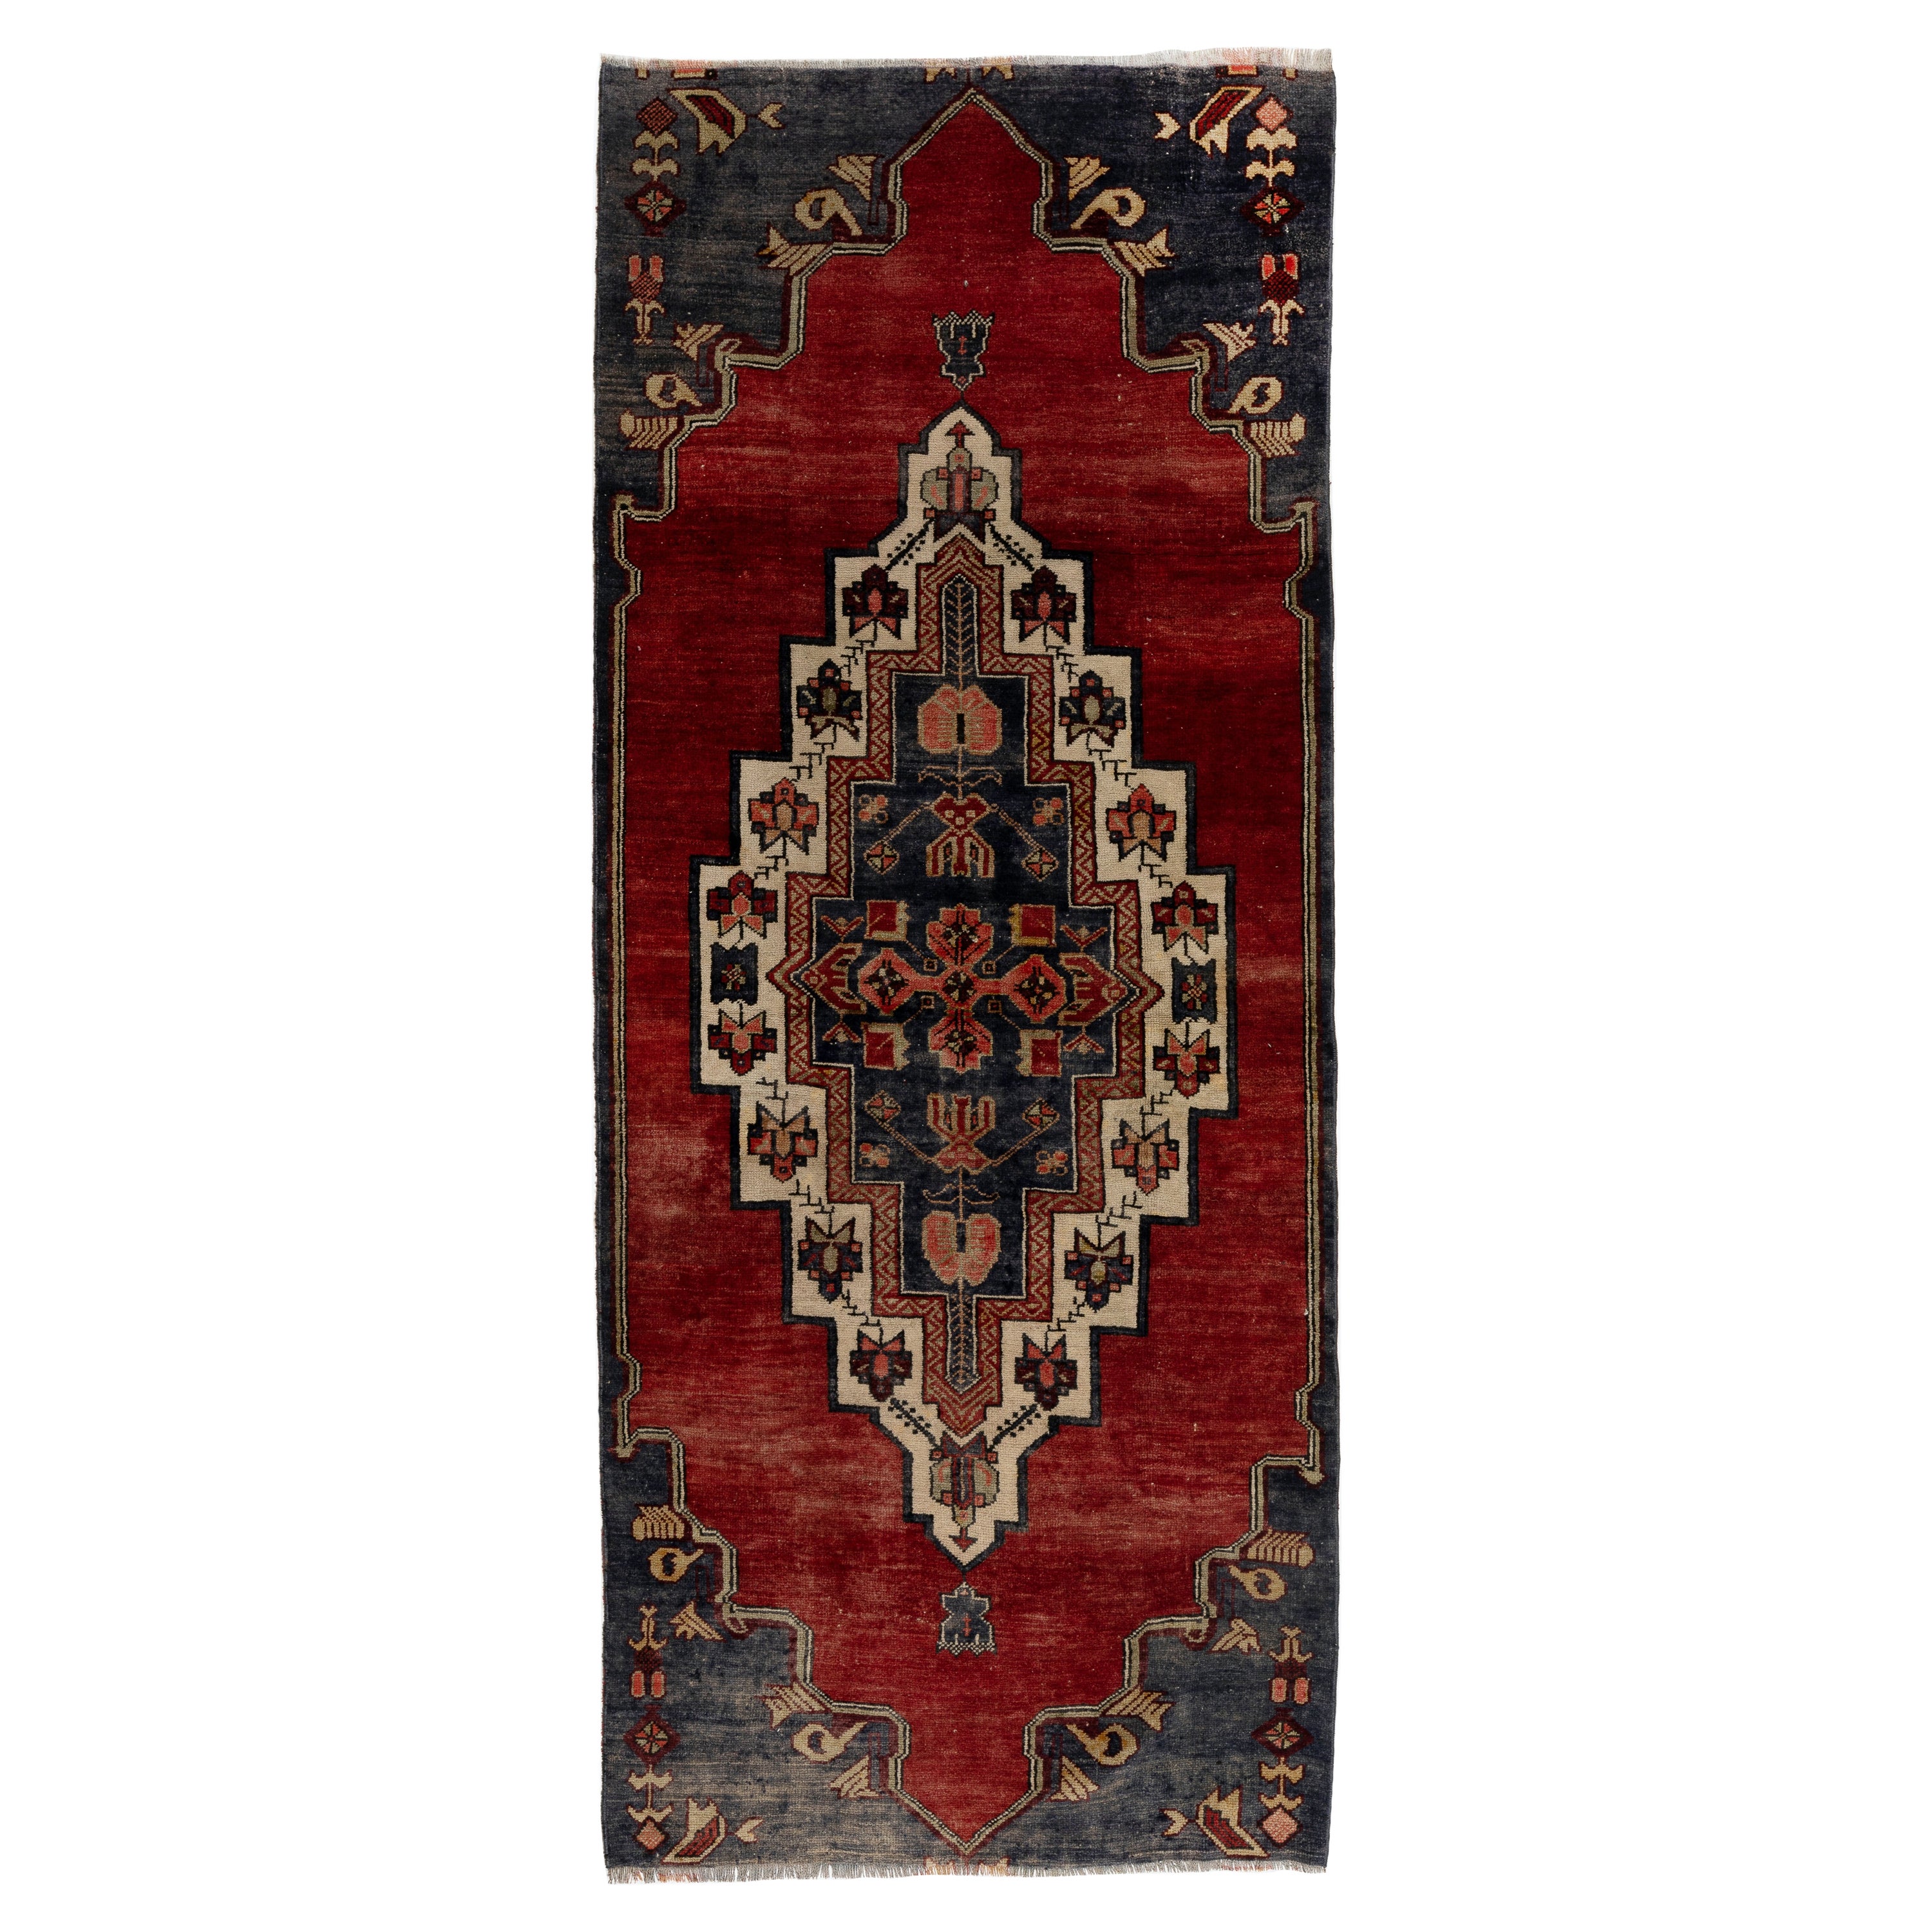 3.8x9 Ft Vintage Hand-Knotted Turkish Rug in Red and Dark Navy Color, circa 1960 For Sale